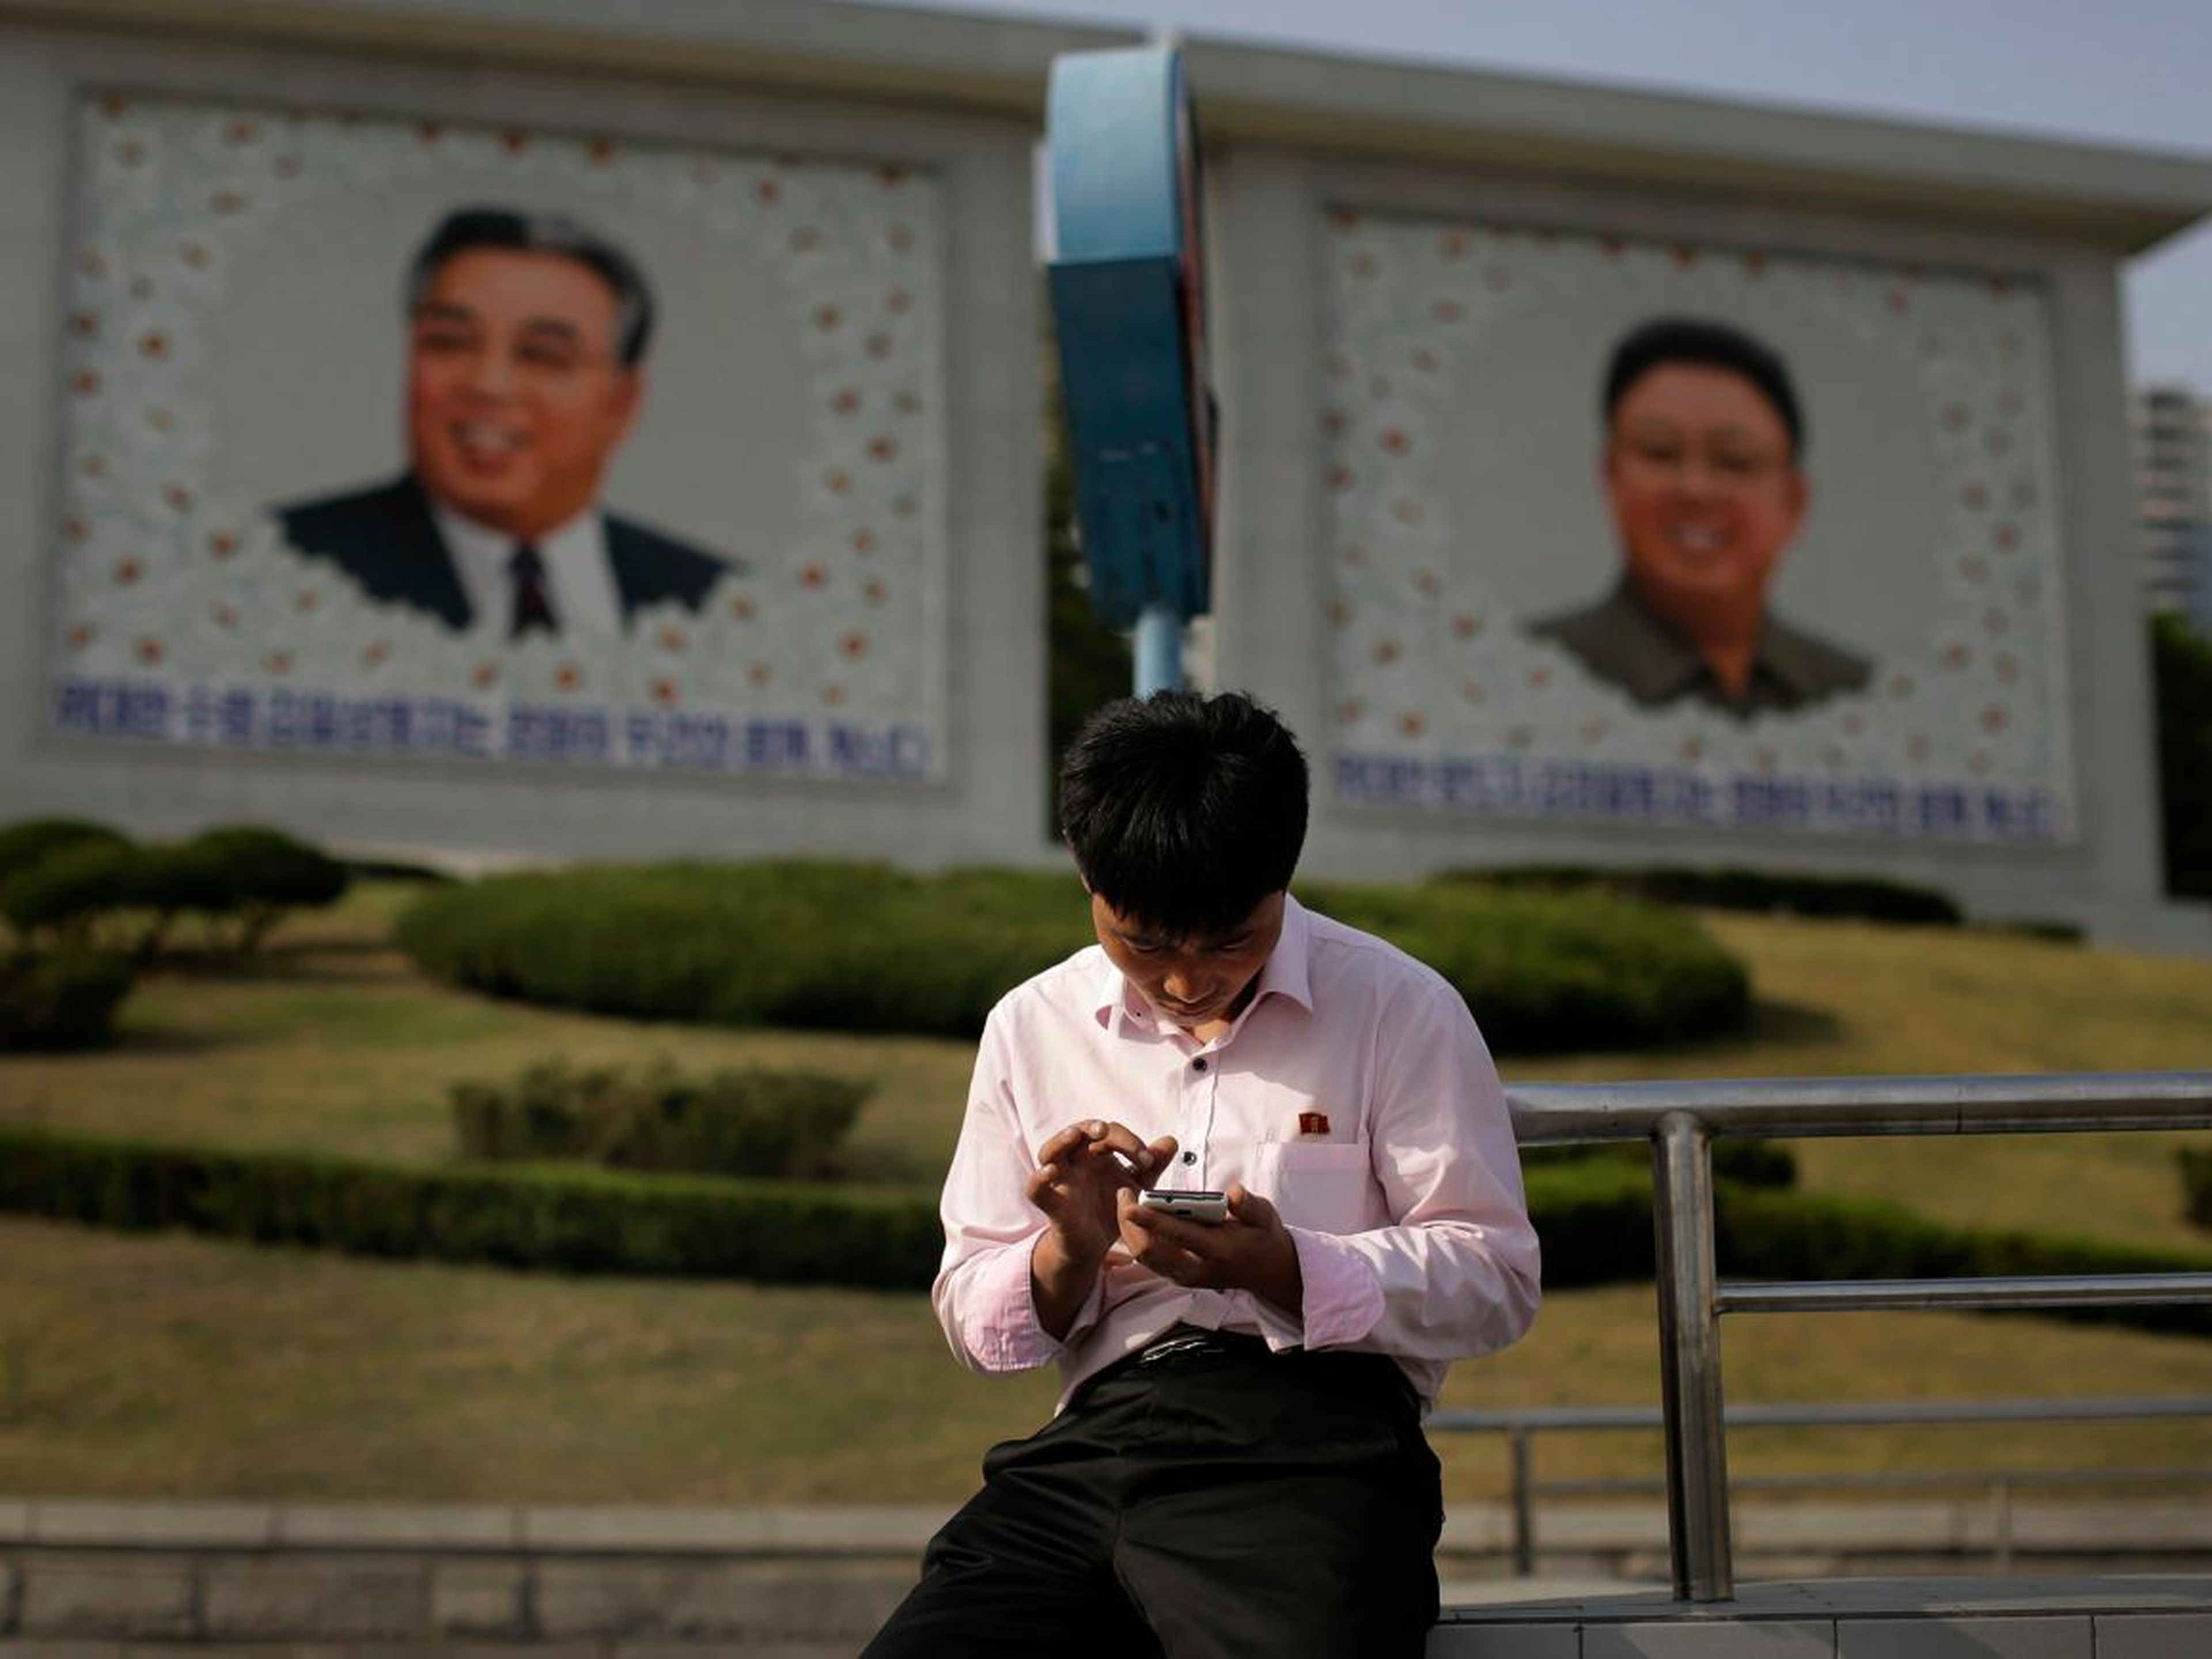 4. If you open a foreign media file on a North Korean device, the regime will know about it